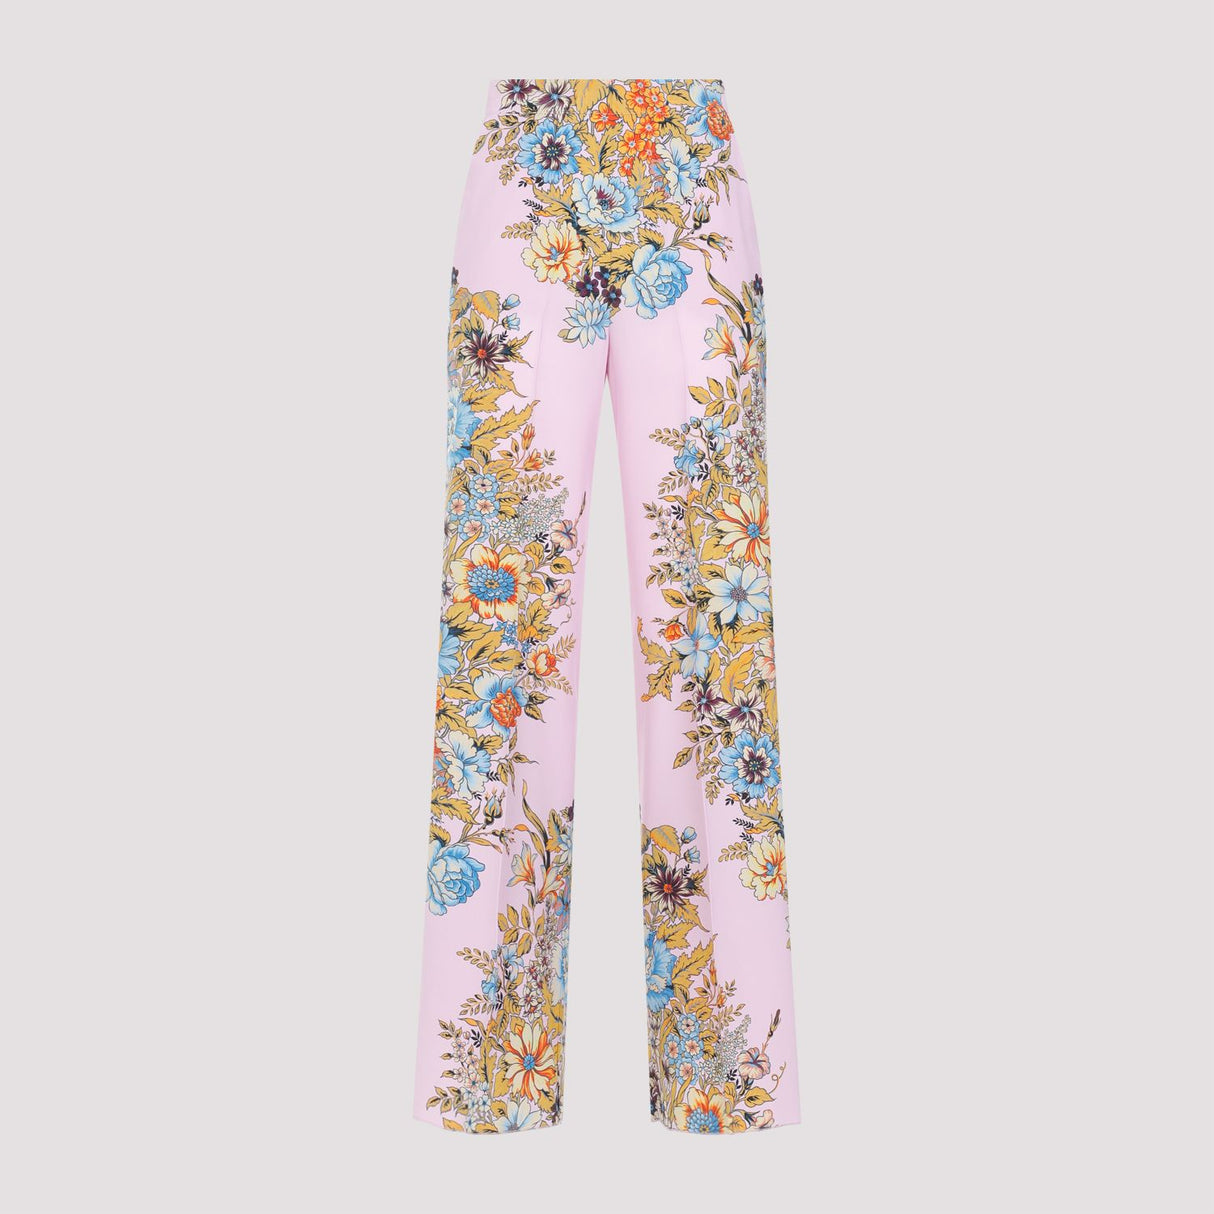 Luxurious Silk Pants in Pretty Pink and Purple for Women